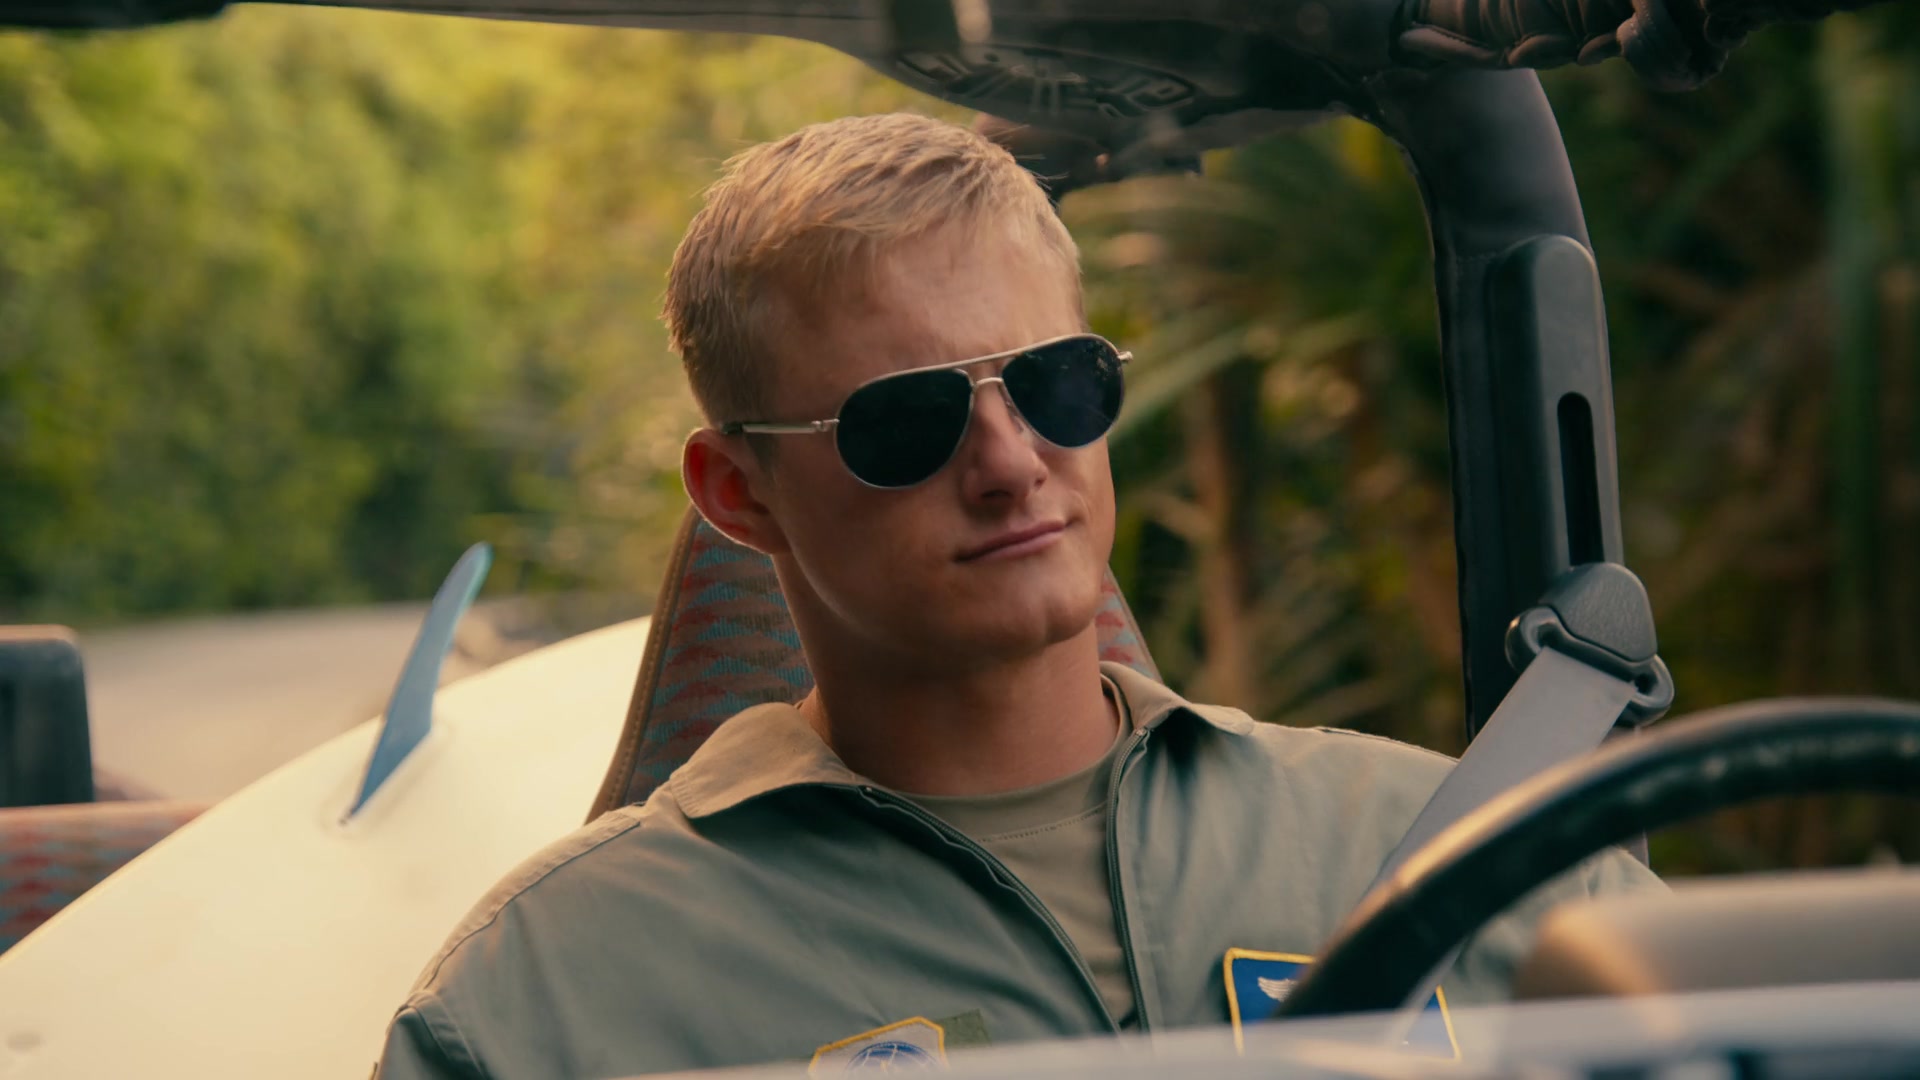 Tom Ford Marko Pilot Sunglasses Of Alexander Ludwig As Captain Andrew Jantz  In Operation Christmas Drop (2020)